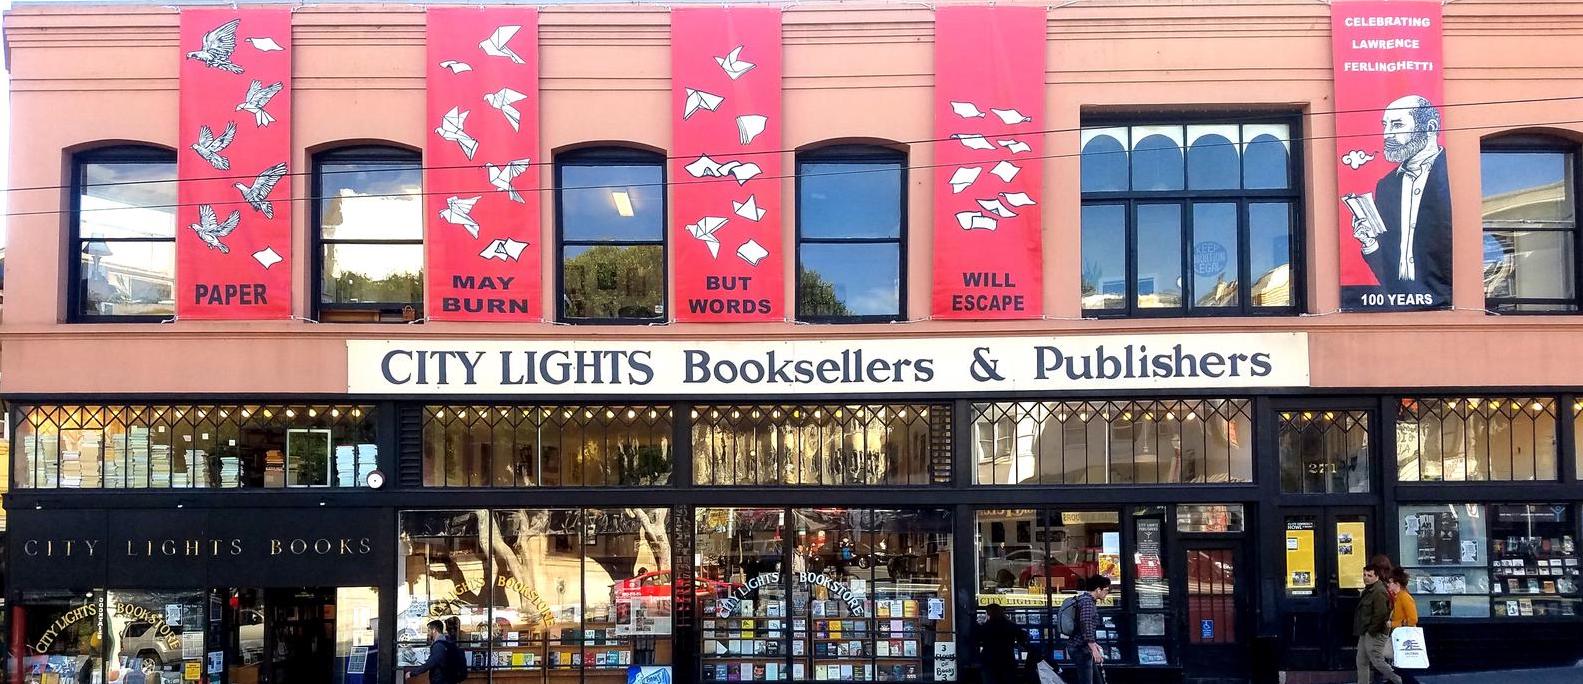 5 Nob Hill Bookstores We Love (Image-2)